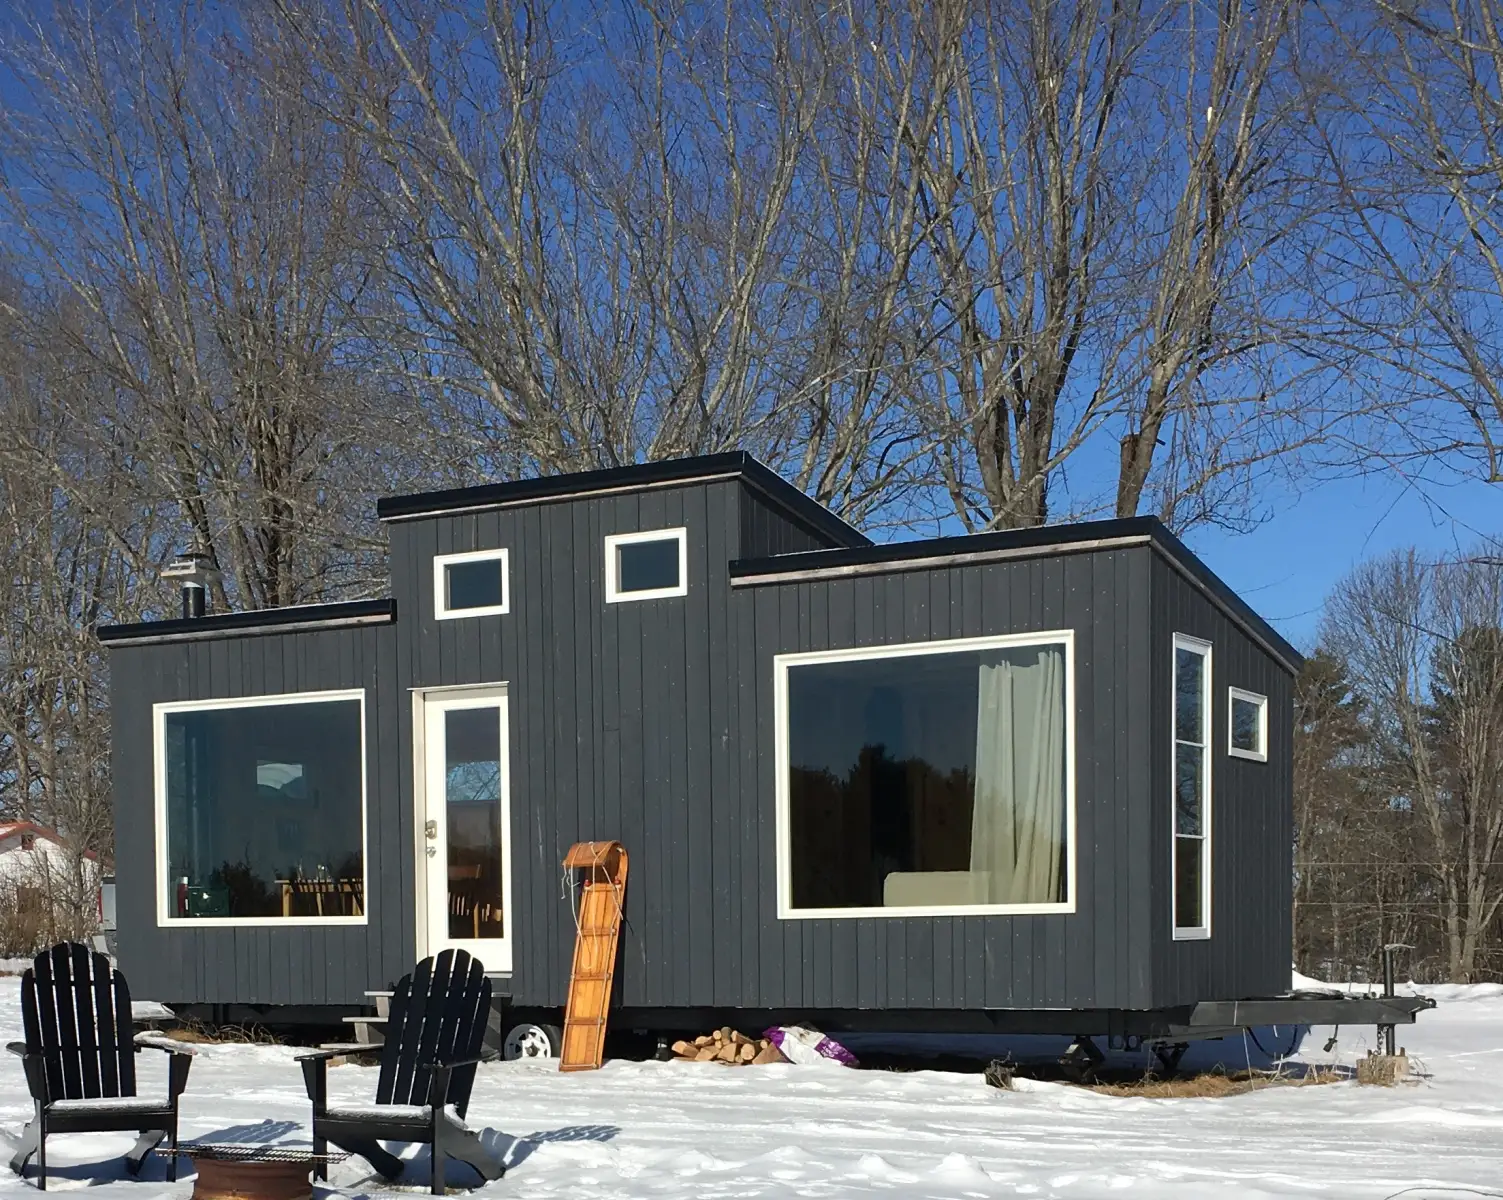 Tiny house for winter glamping in New England on Airbnb.